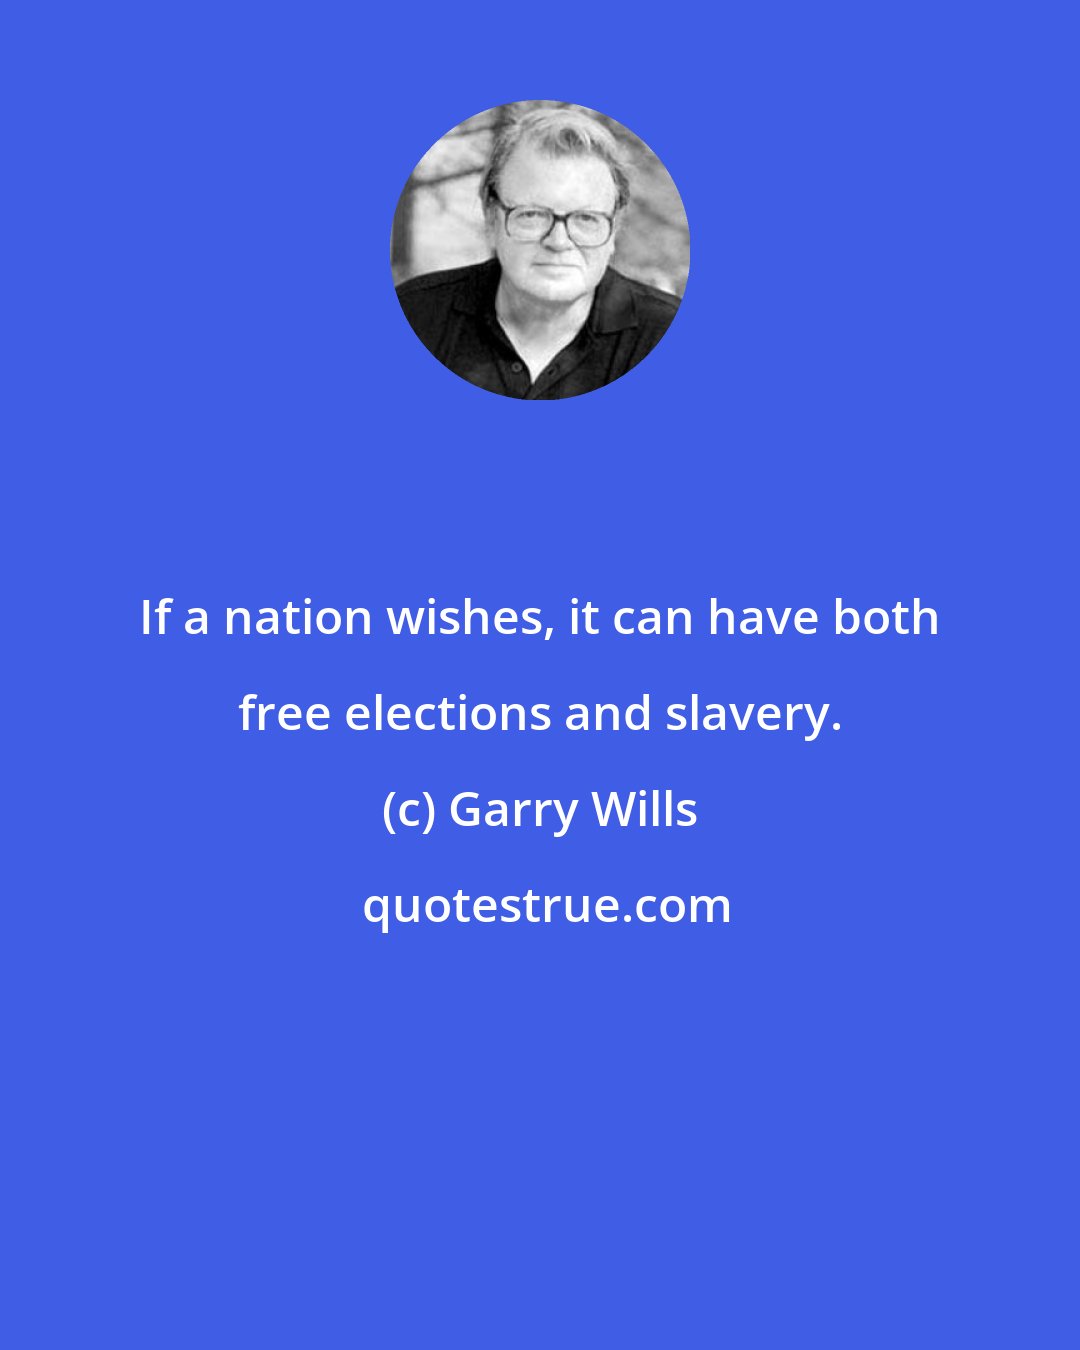 Garry Wills: If a nation wishes, it can have both free elections and slavery.